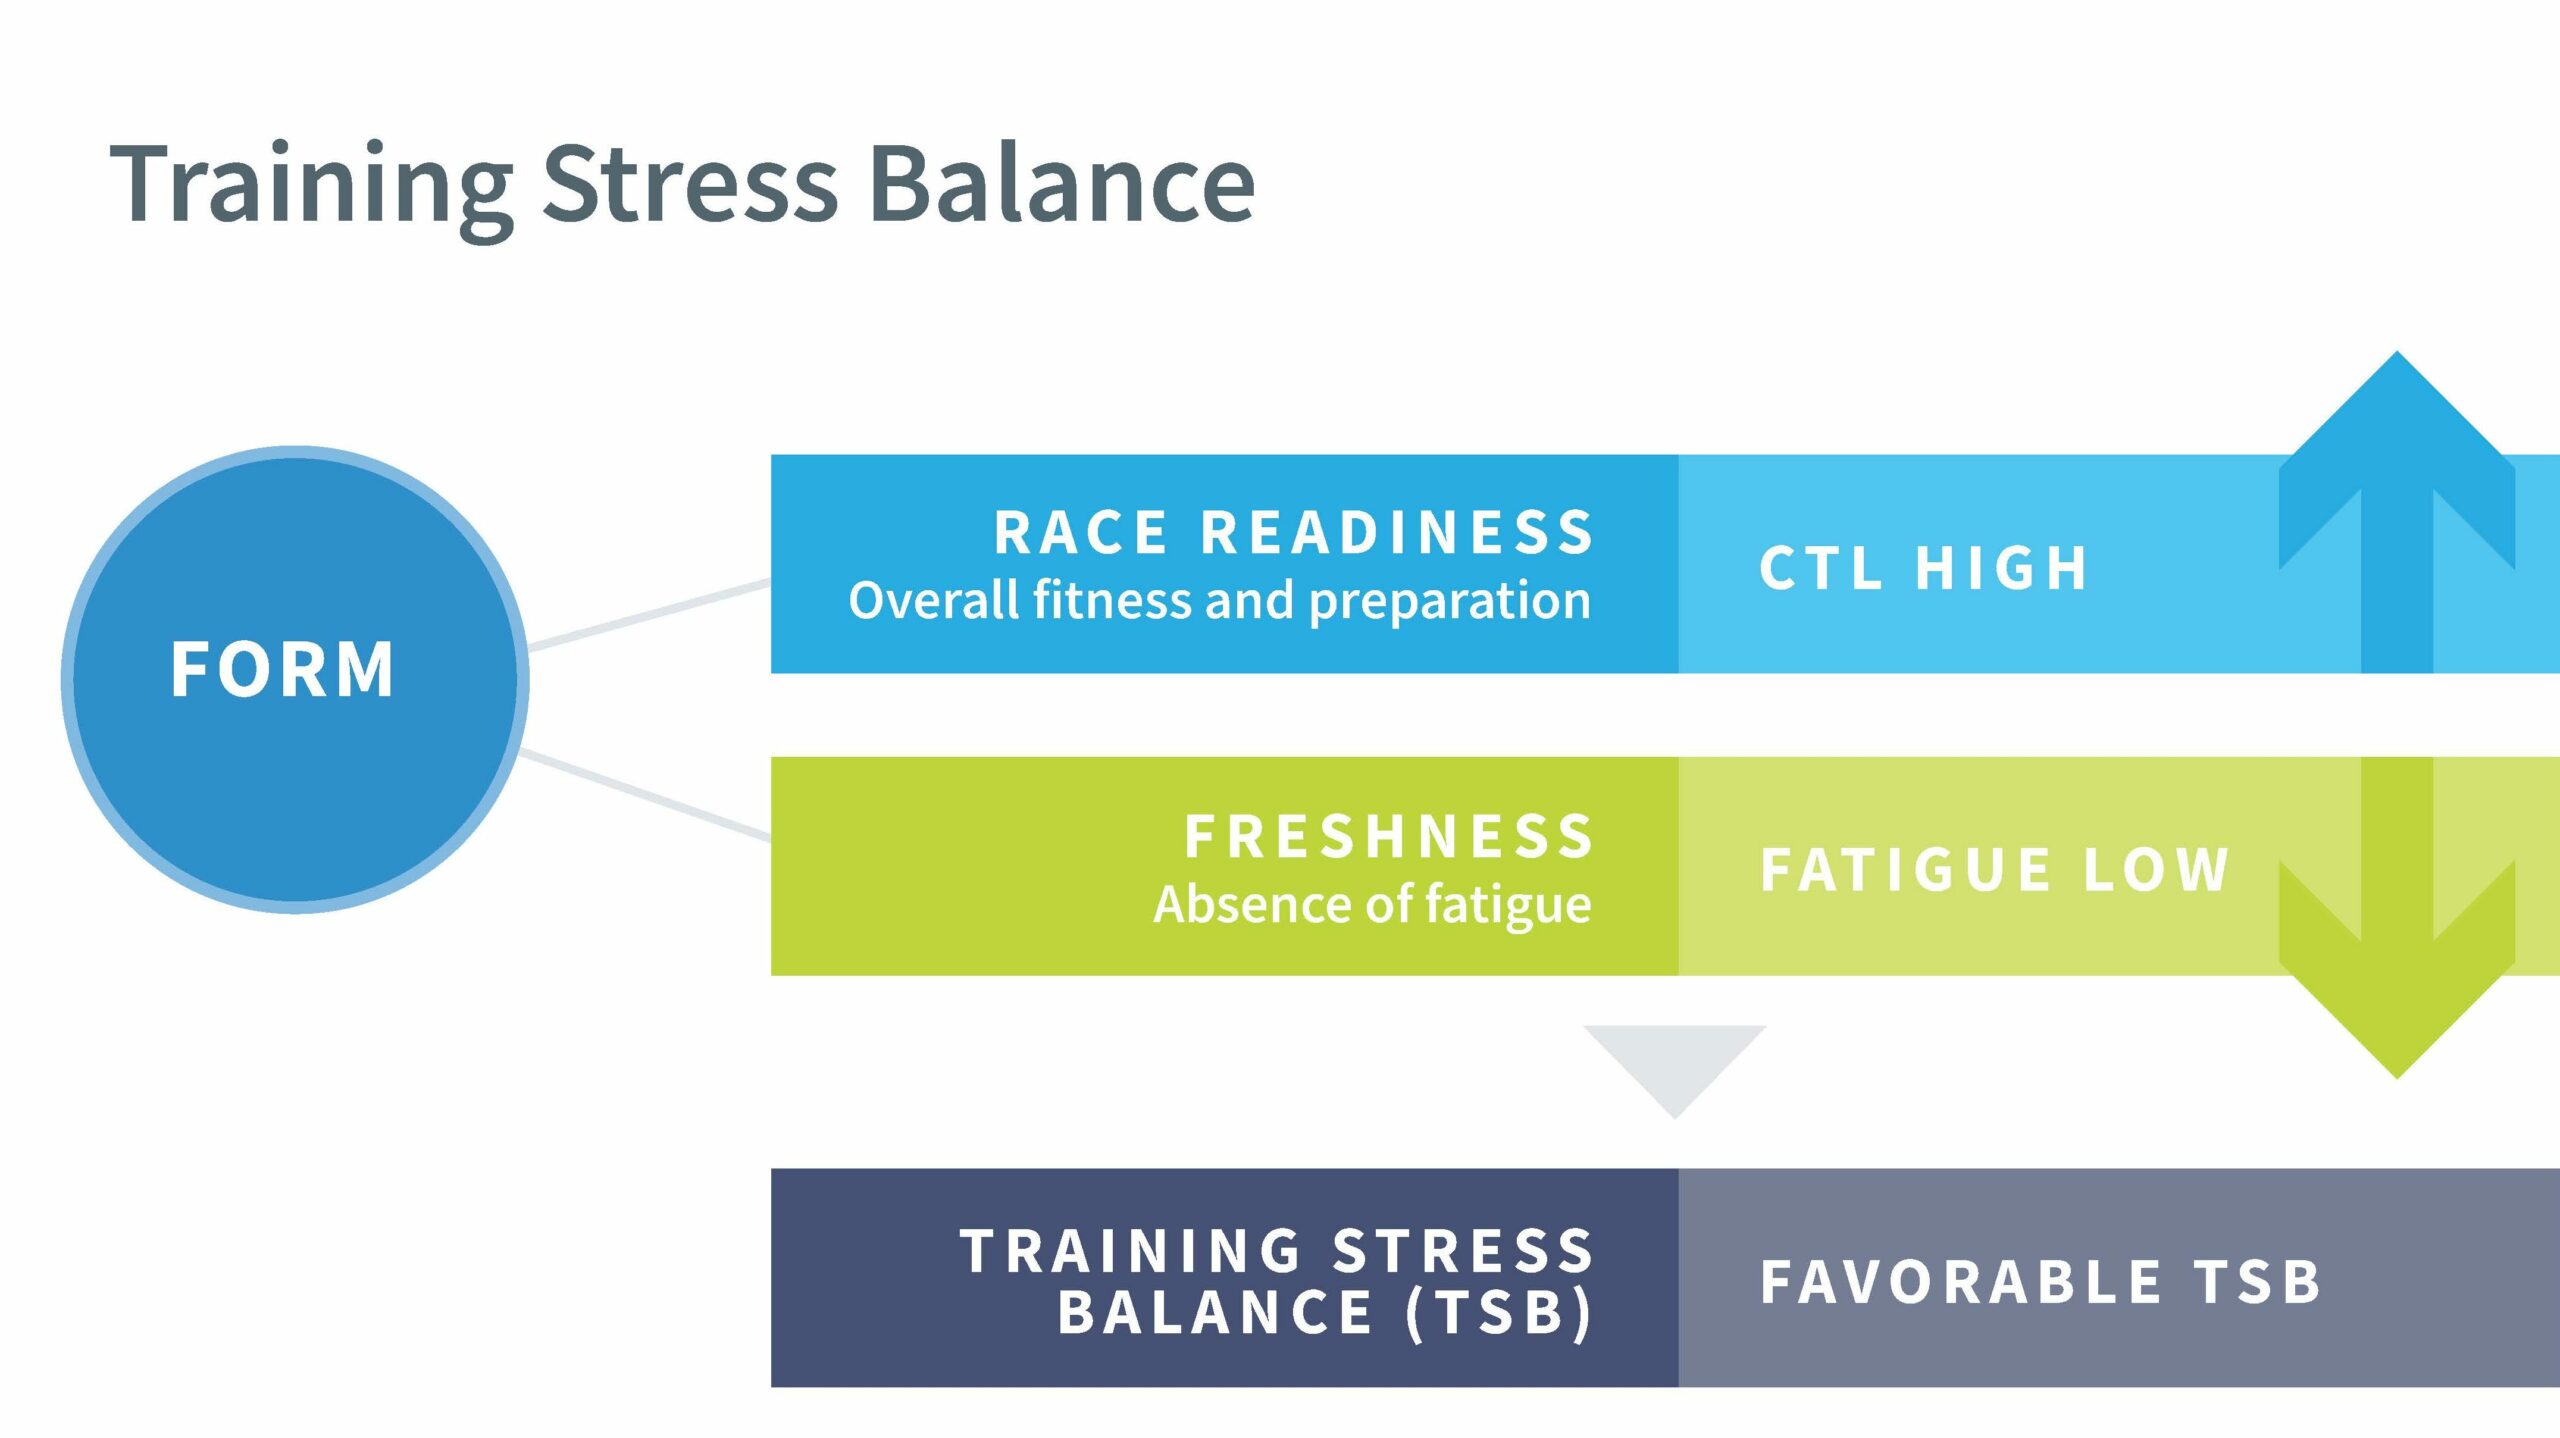 Graphic illustrating how high fitness (CTL) and low fatigue (ATL) make for a positive Training Stress Balance